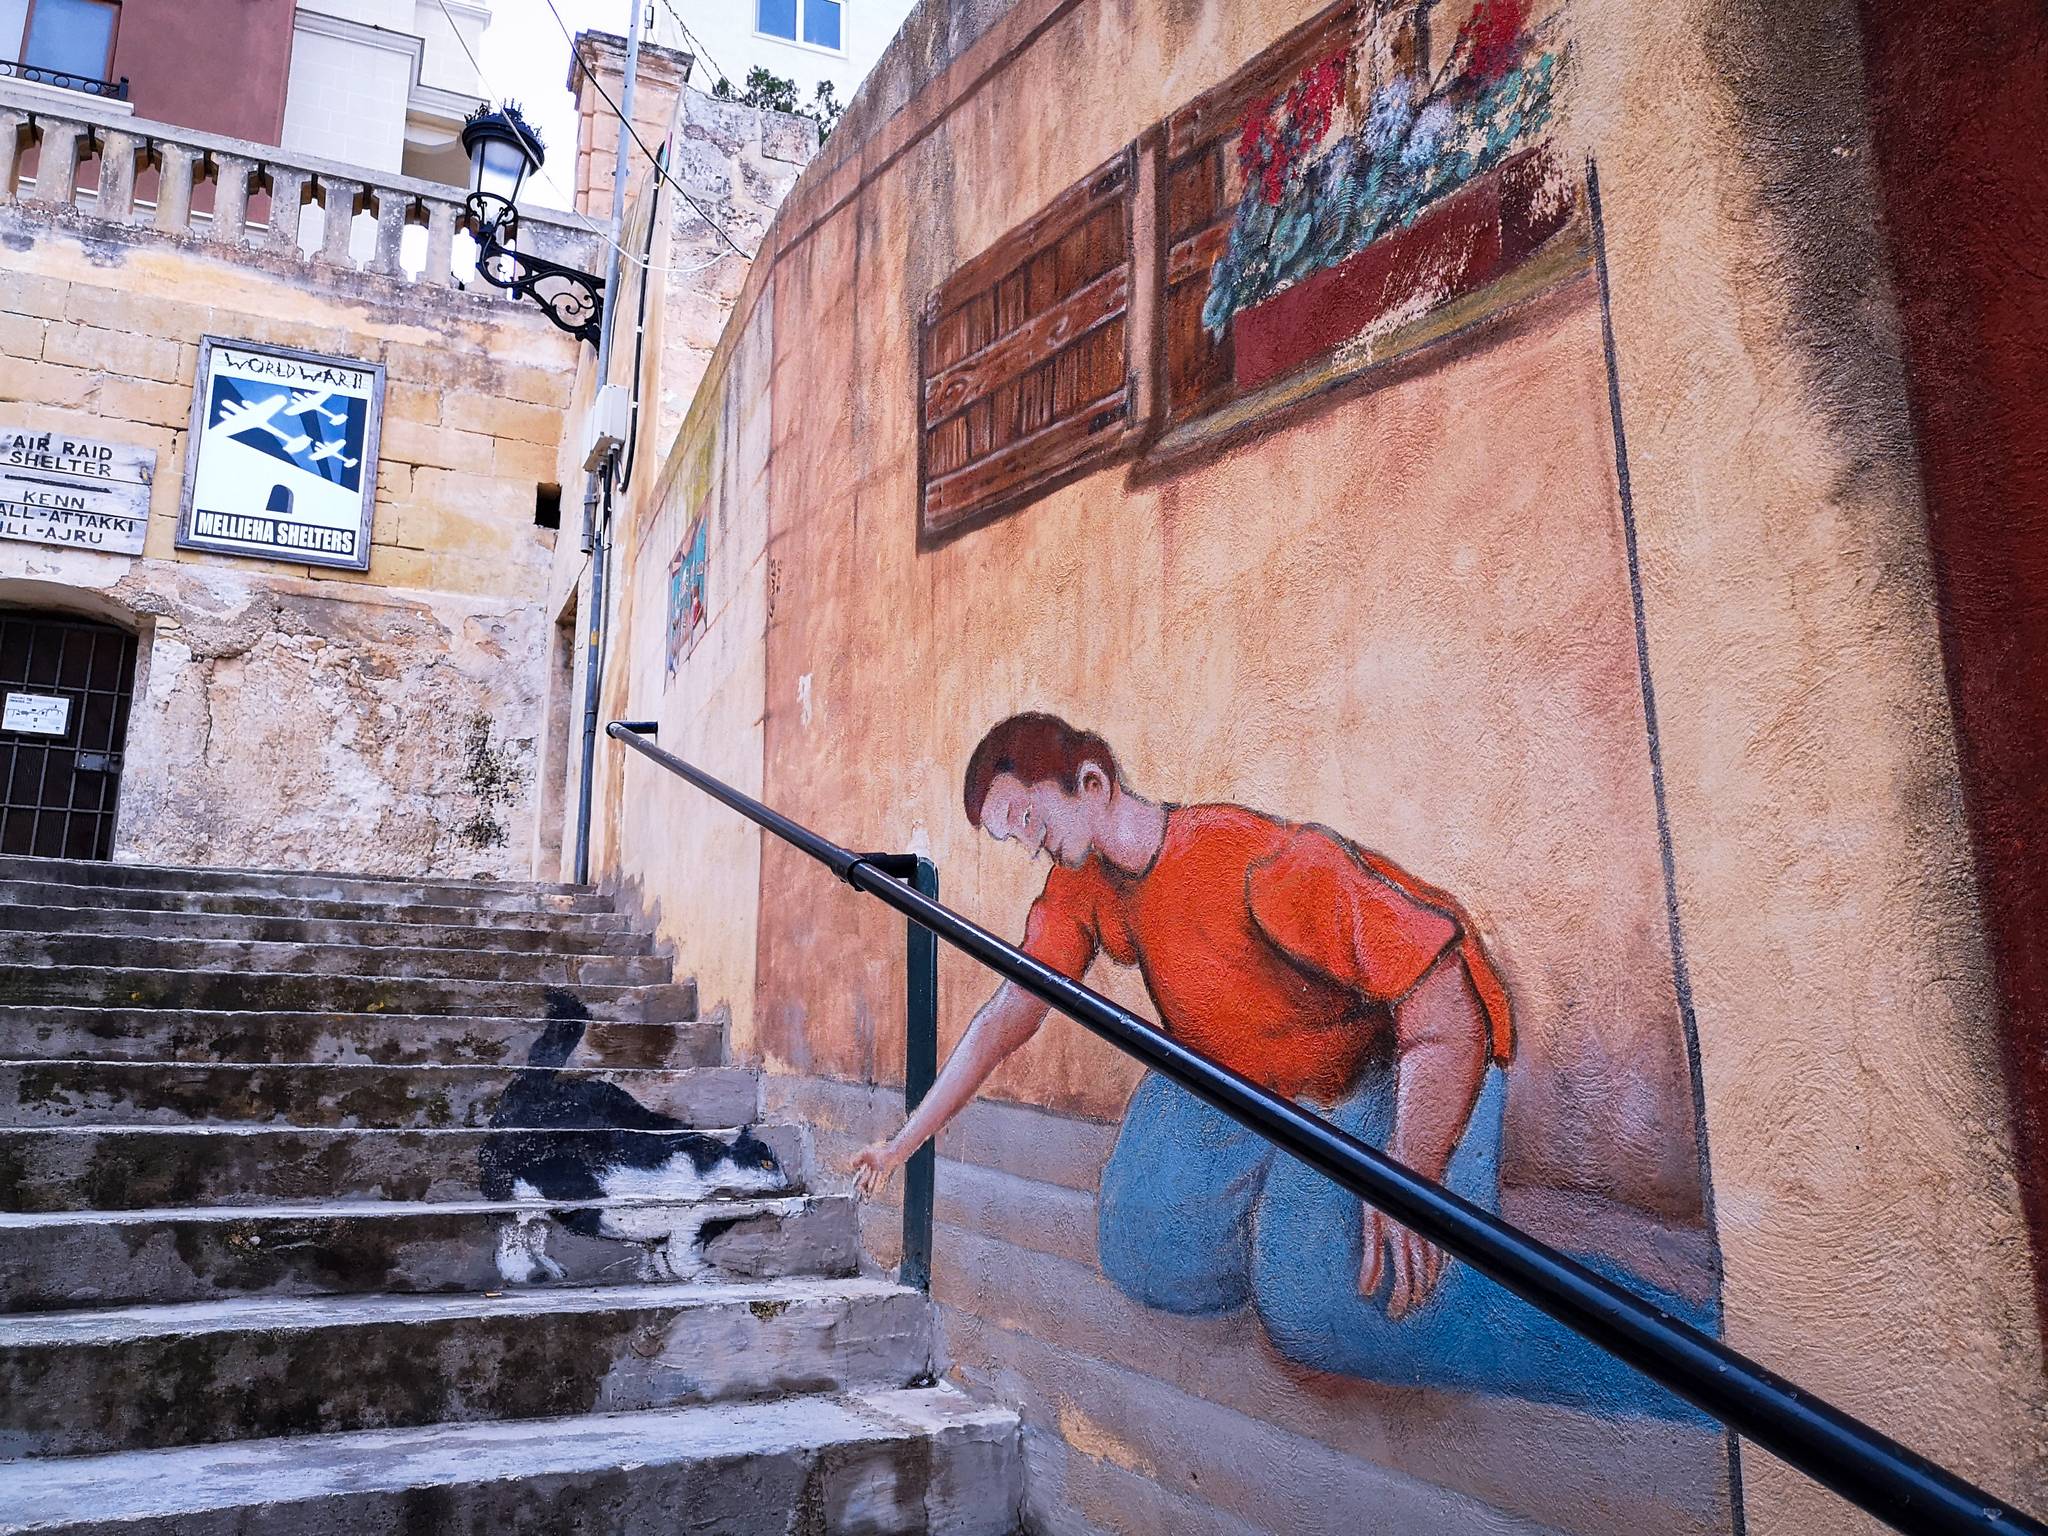 Unknown - Malta&mdash;The boy and the cat